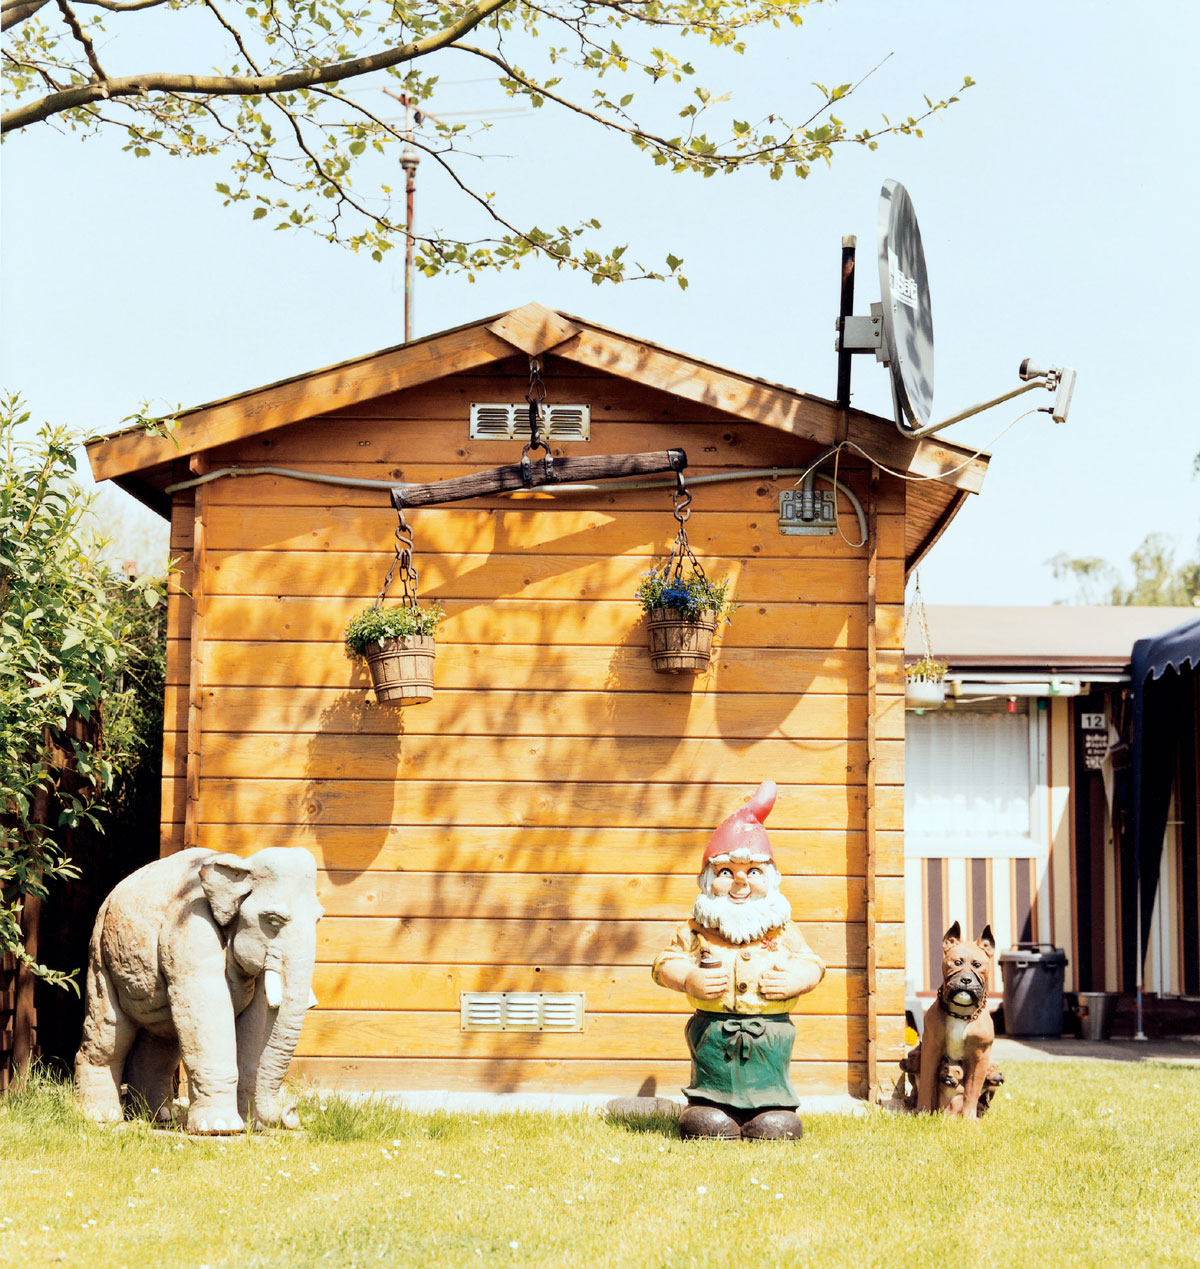 A photograph by artist Enver Hirsch of the decorations in a Schreber garden in Germany.